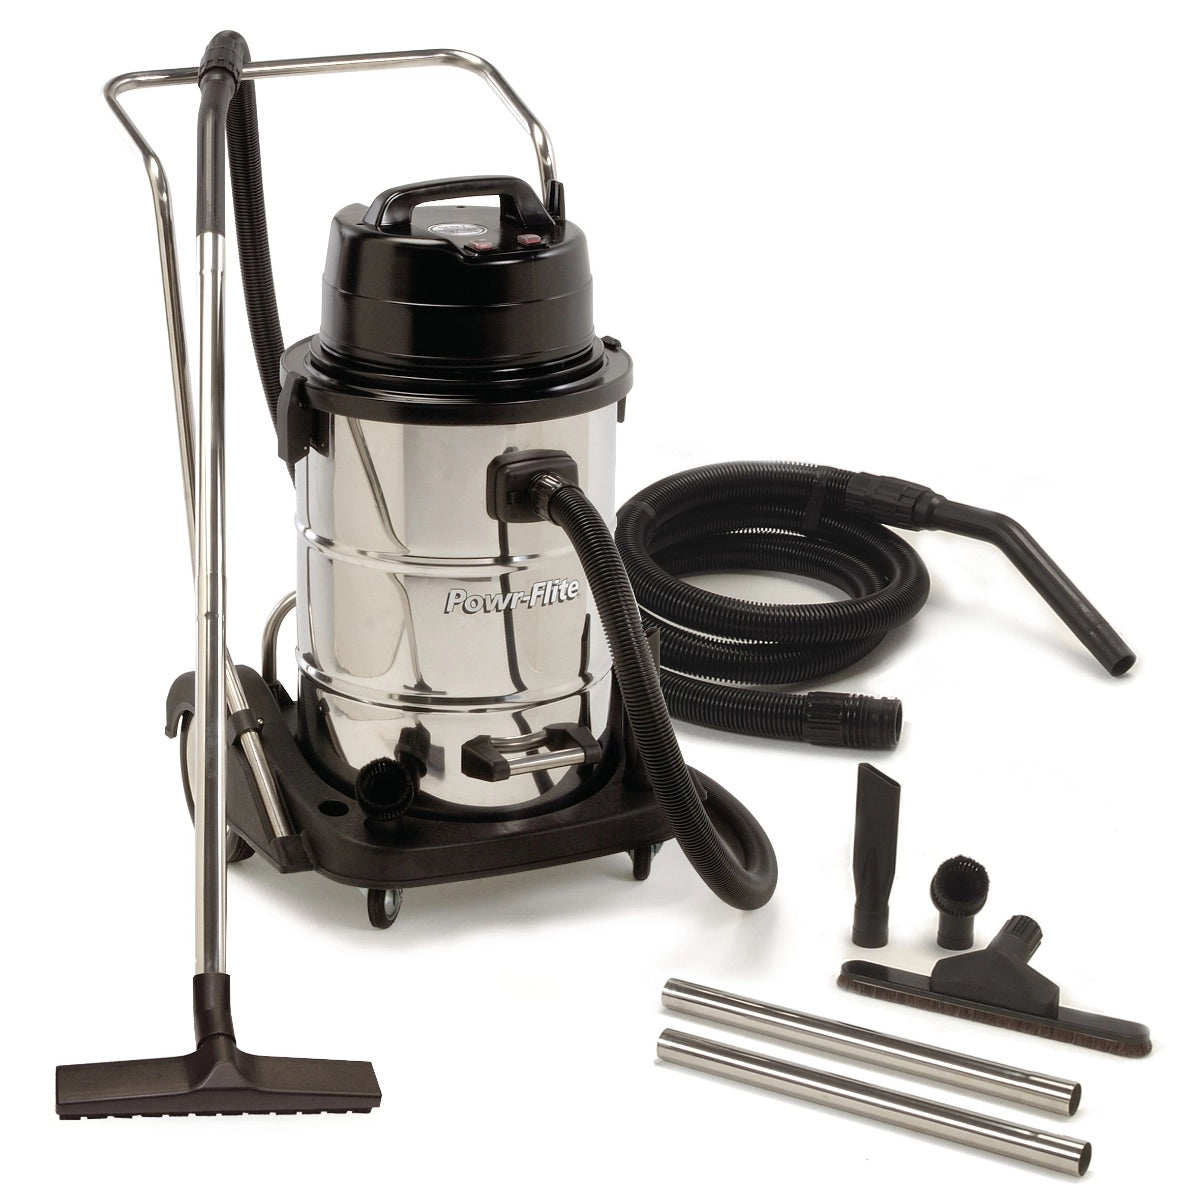 Powr-Flite Pf57 Wet Dry Vacuum 20 Gallon Dual Motor with Stainless Steel Tank